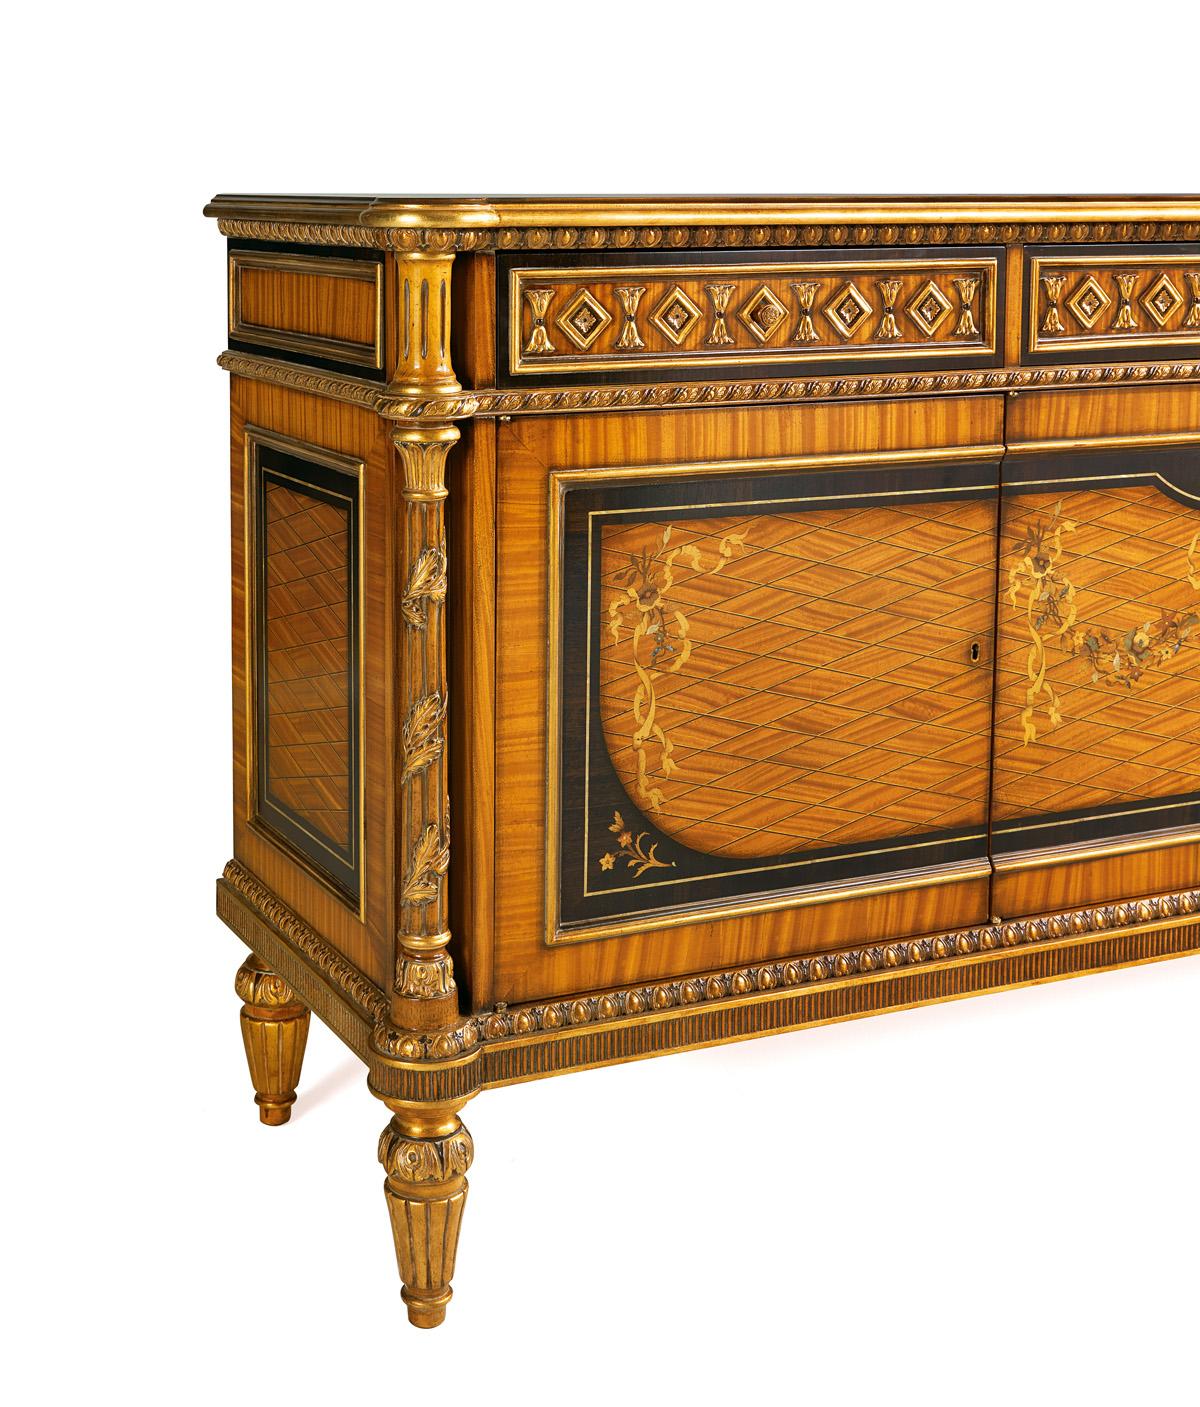 The B/5143 sideboard, with 3 doors is part of the new Classic collection by Zanaboni: veneered in citronnier and ebony woods, a real artwork, with details in mother of pearl and hand carved details.
Item of superior craftsmanship, 100% handmade and